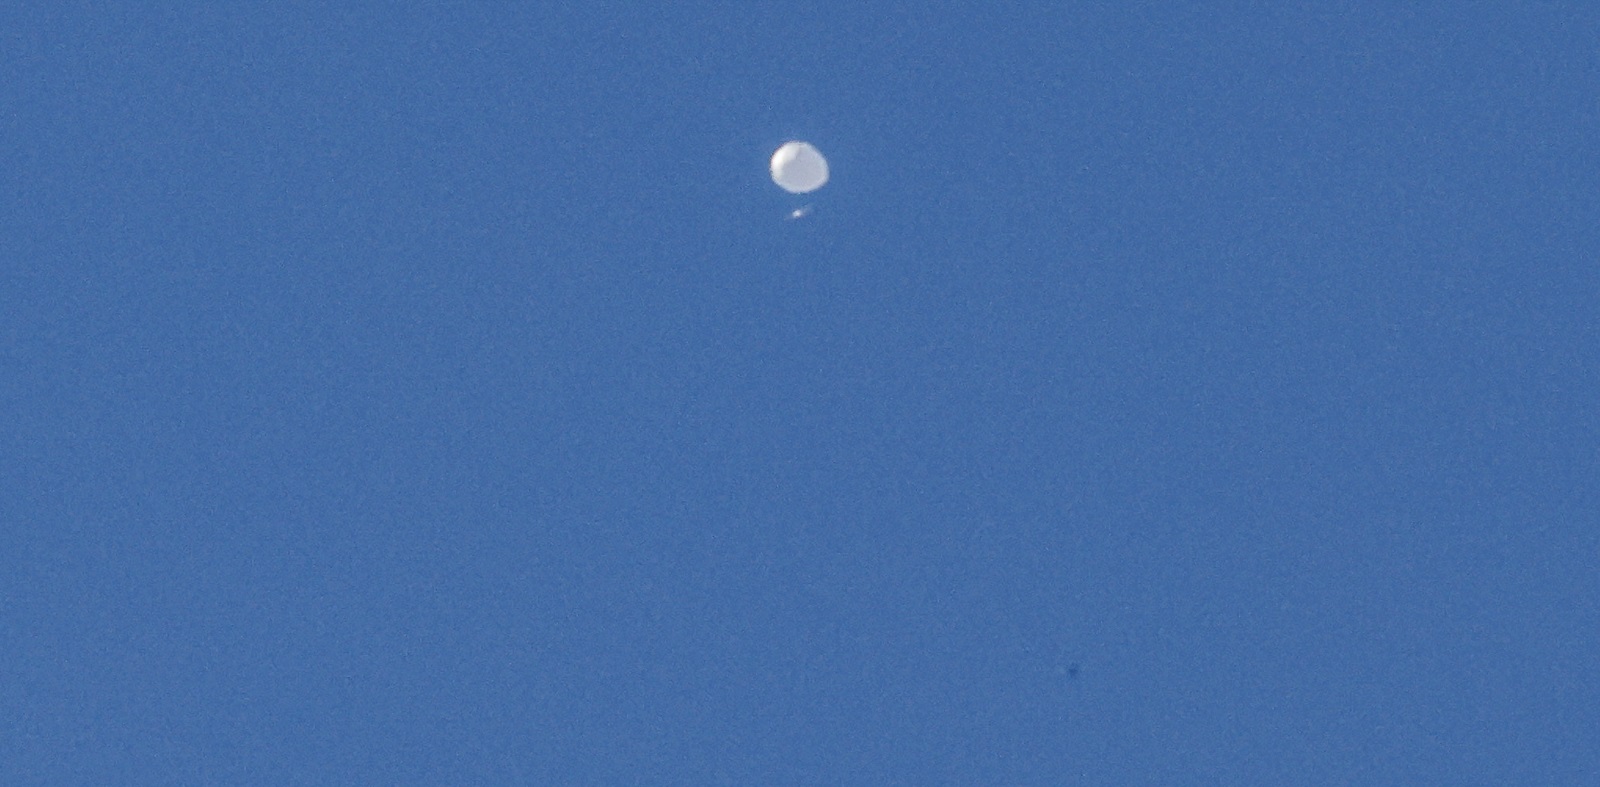 epa10447610 A high-altitude balloon, which the US government has stated is Chinese, is seen as it continues its multi-day path across the Northern United States in Charlotte, North Carolina, USA, 04 February 2023. US Secretary of State Blinken postponed a planned trip to China following the discovery of the balloon. The Pentagon said that the maneuverable Chinese surveillance balloon was posing 'no risk to commercial aviation, military assets or people on the ground'.  EPA/NELL REDMOND -- BEST QUALITY AVAILABLE